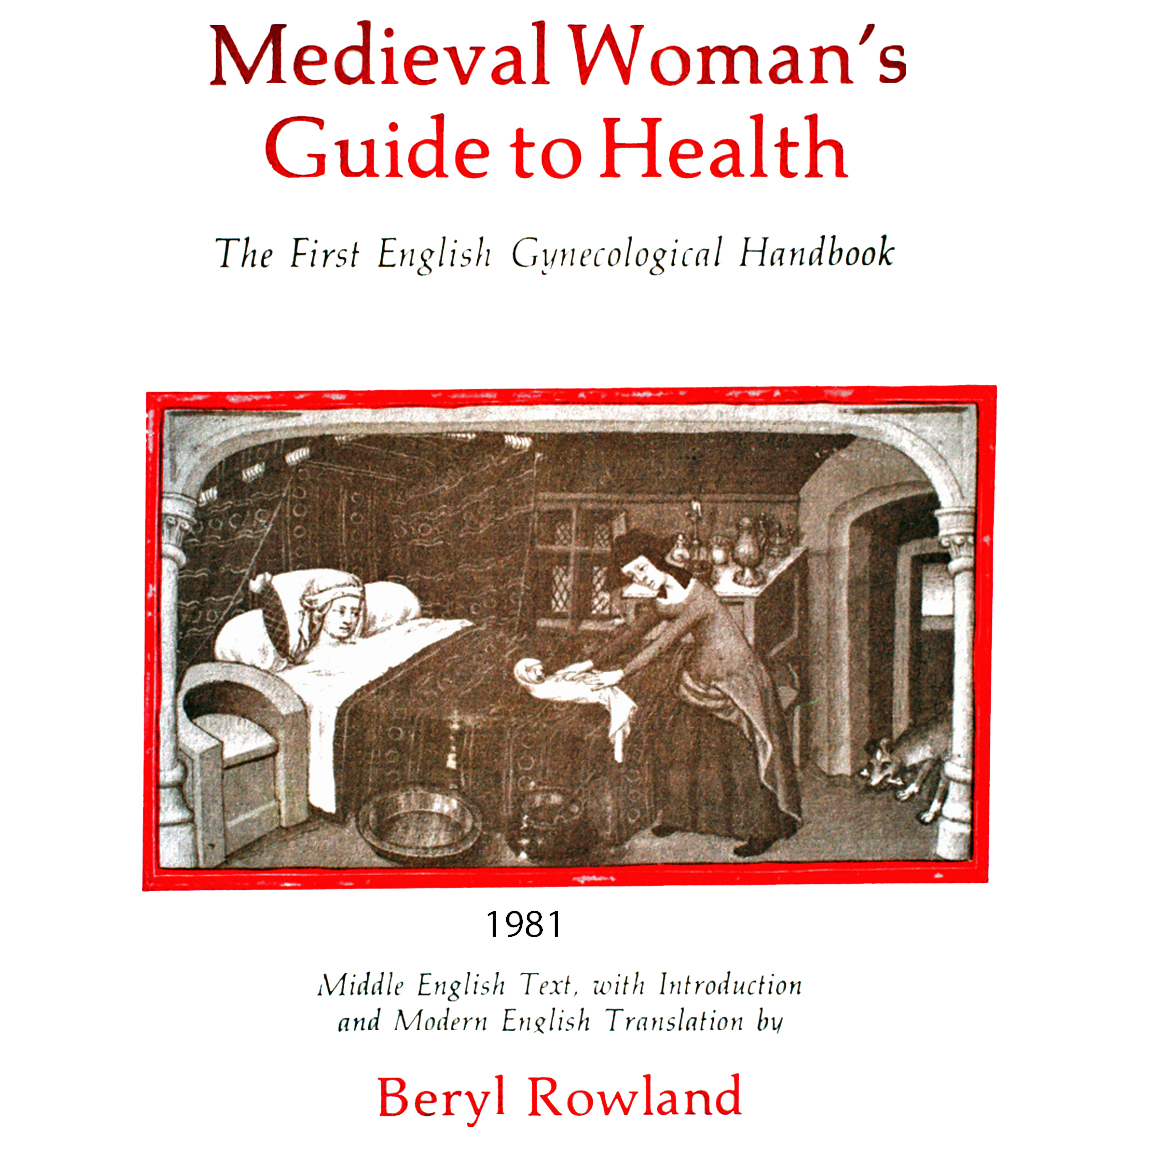 1981-ROWLAND-Medieval Woman's Guide to Health-title